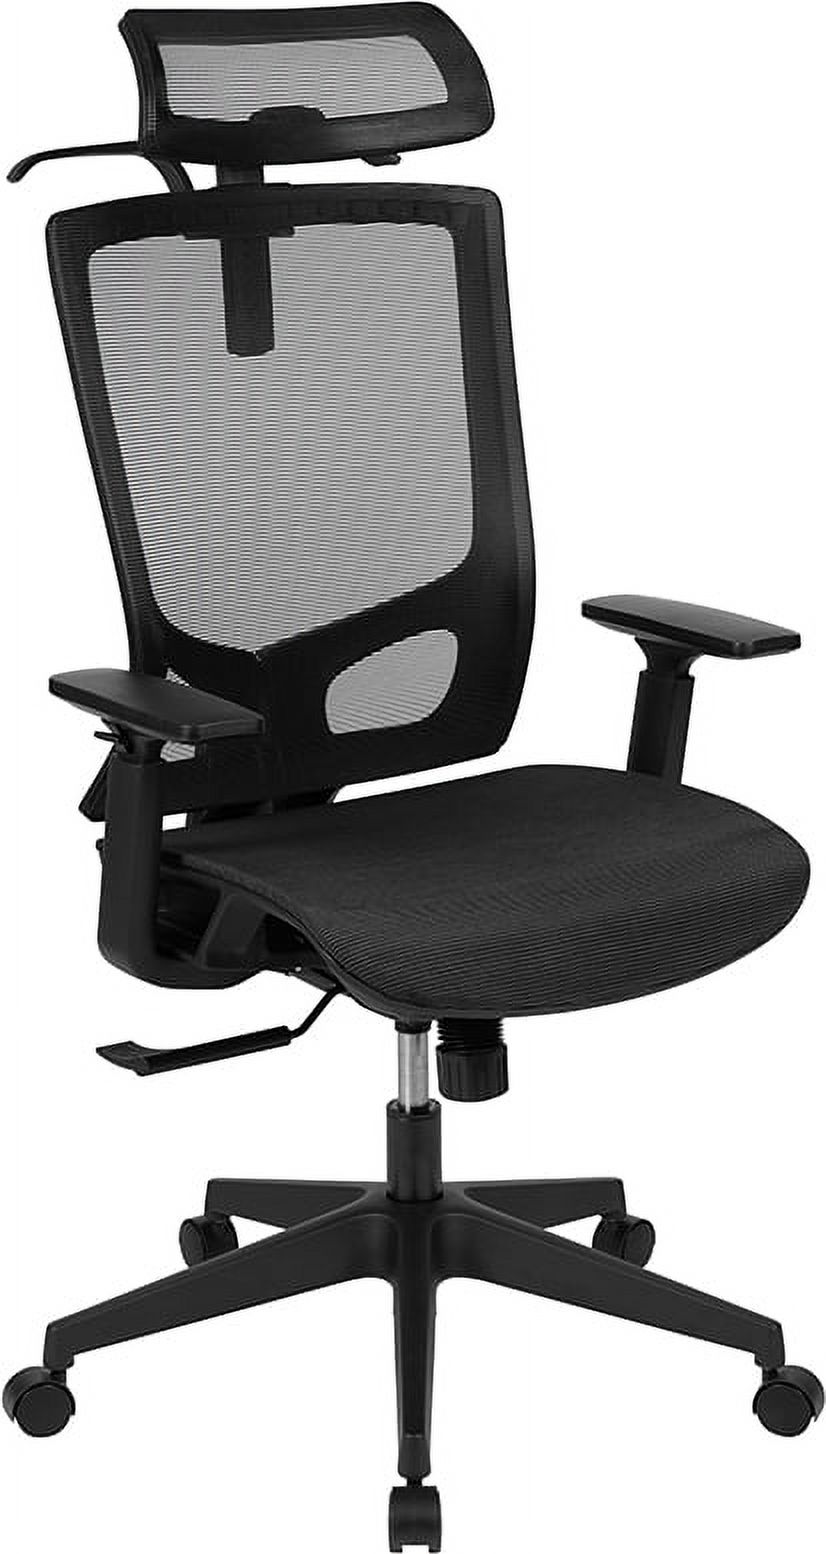 Flash Furniture Ergonomic Mesh Office Chair with Synchro-Tilt, Pivot Adjustable Headrest, Lumbar Support, Coat Hanger and Adjustable Arms in Black [H-2809-1KY-BK-GG] - image 2 of 5